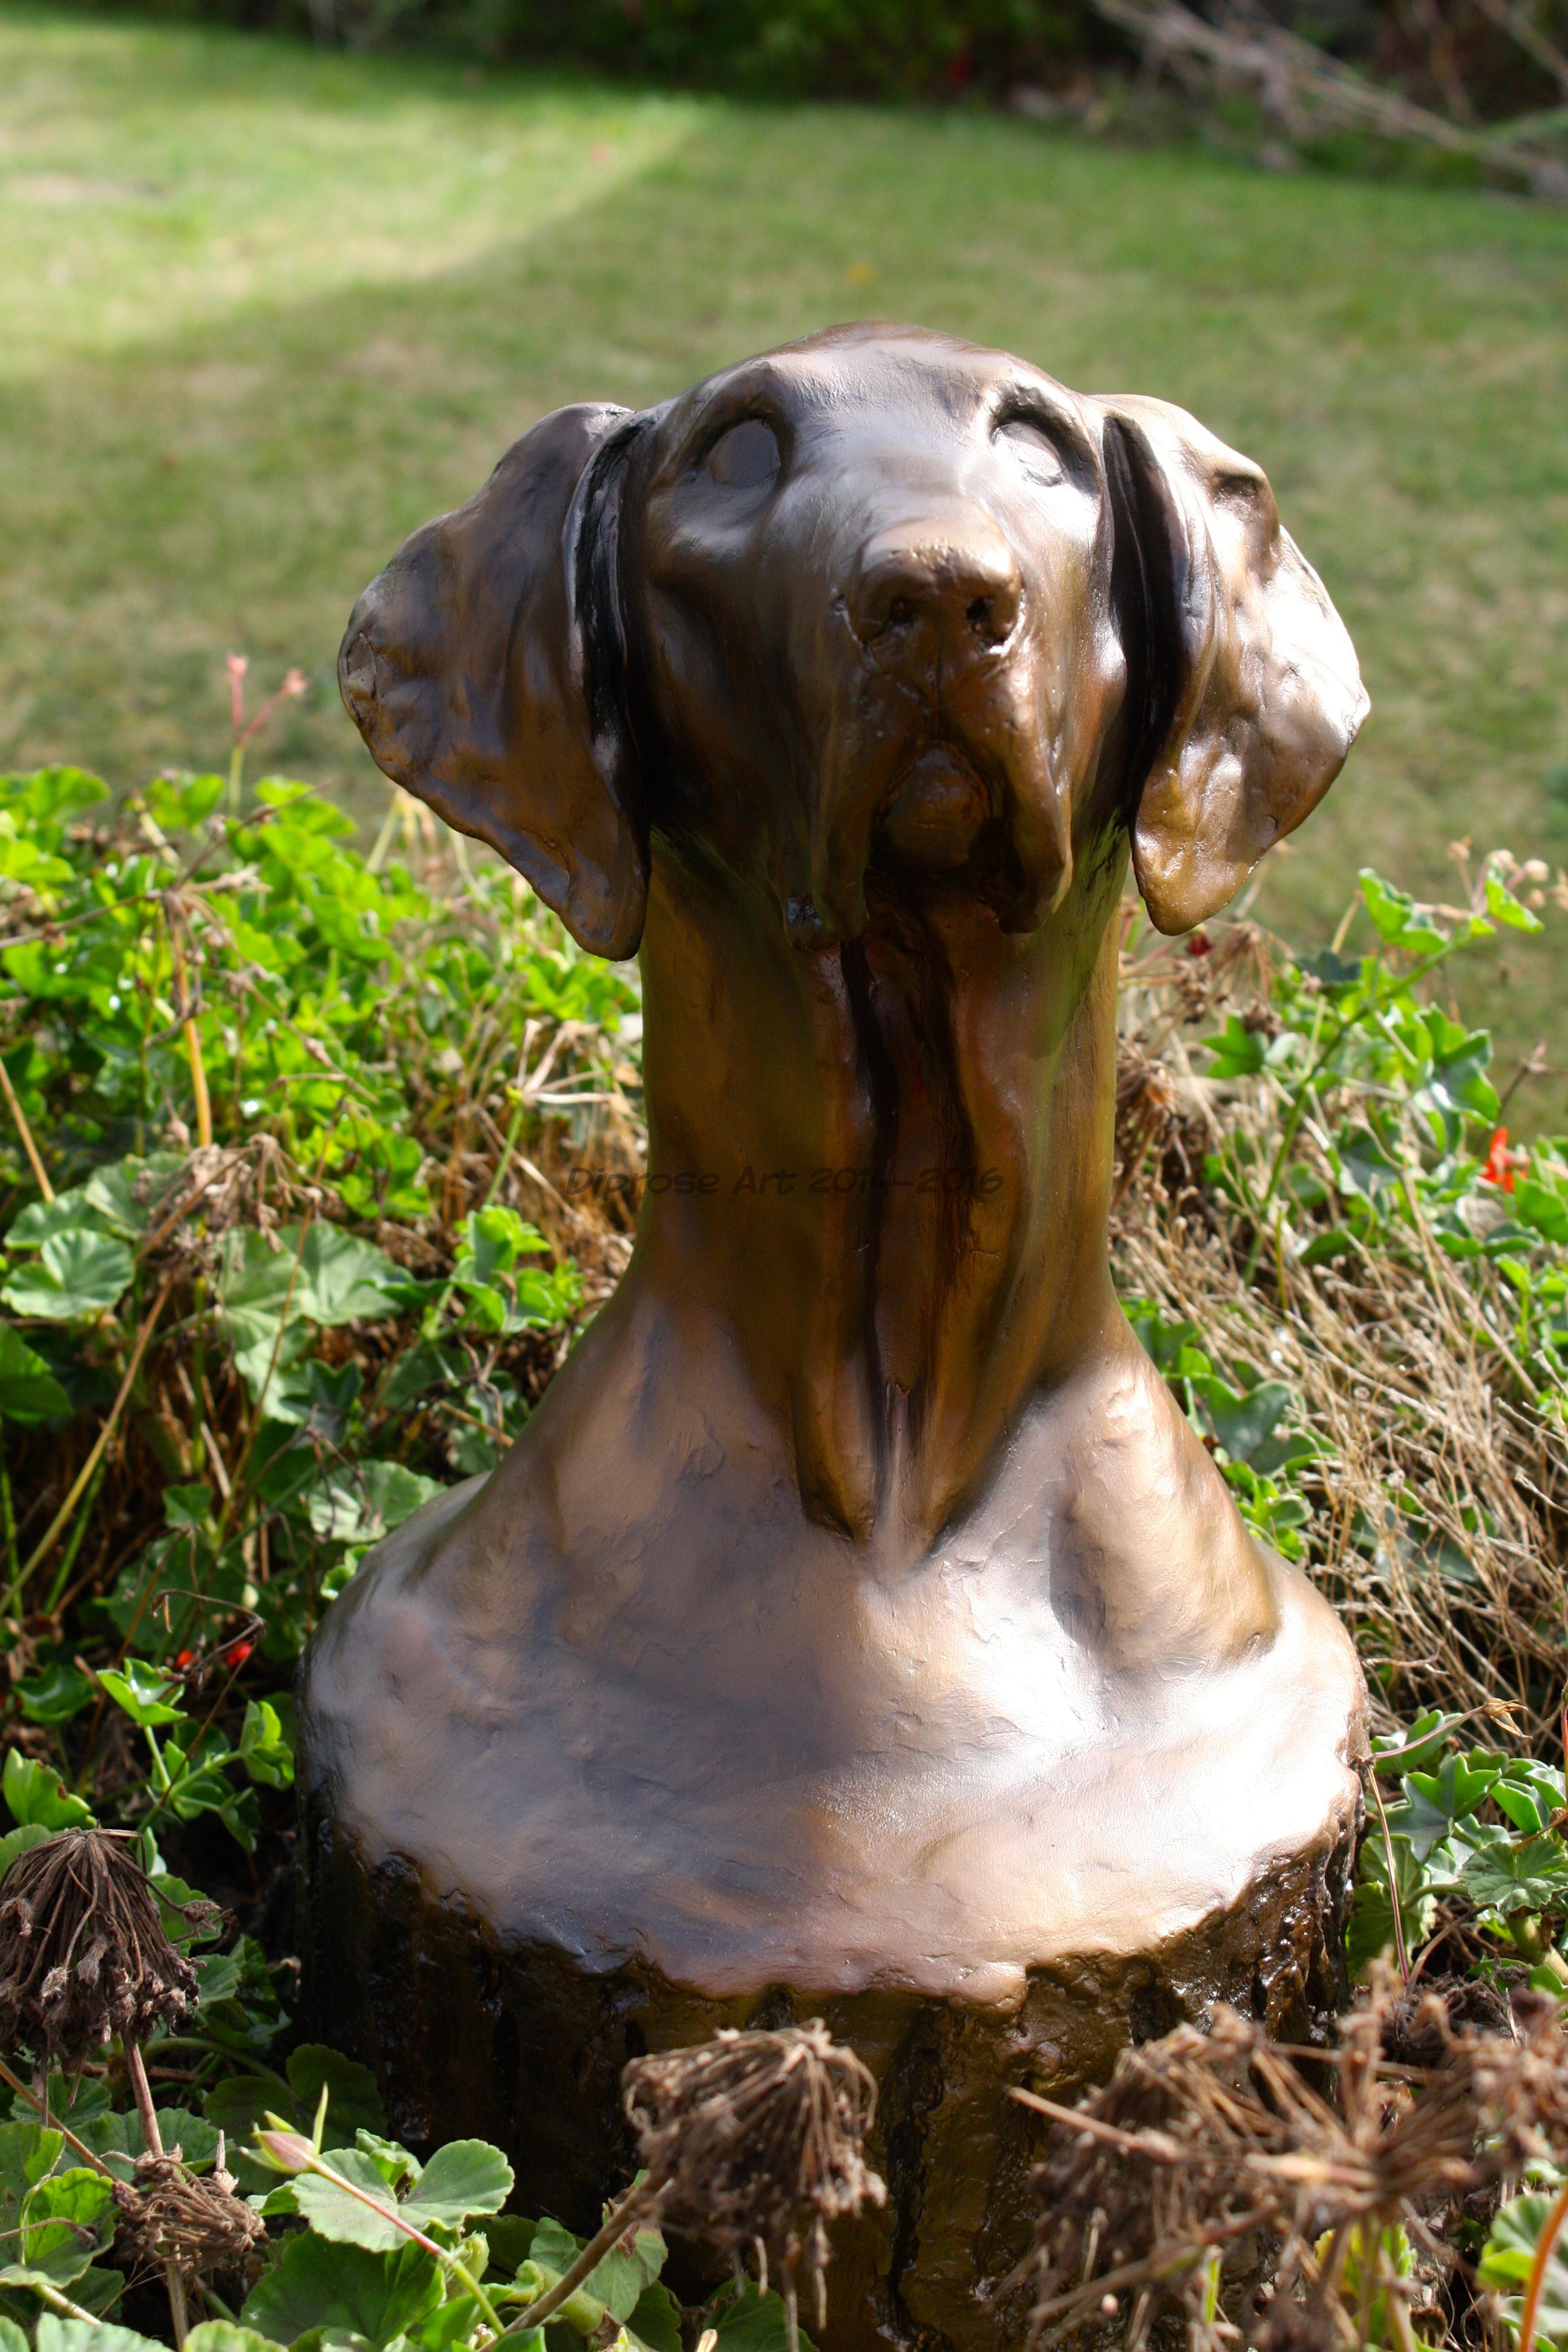 This is my first sculpture of my dear old boy - I miss this old pointer so much and it is my tribute to the wonderful time we spent together